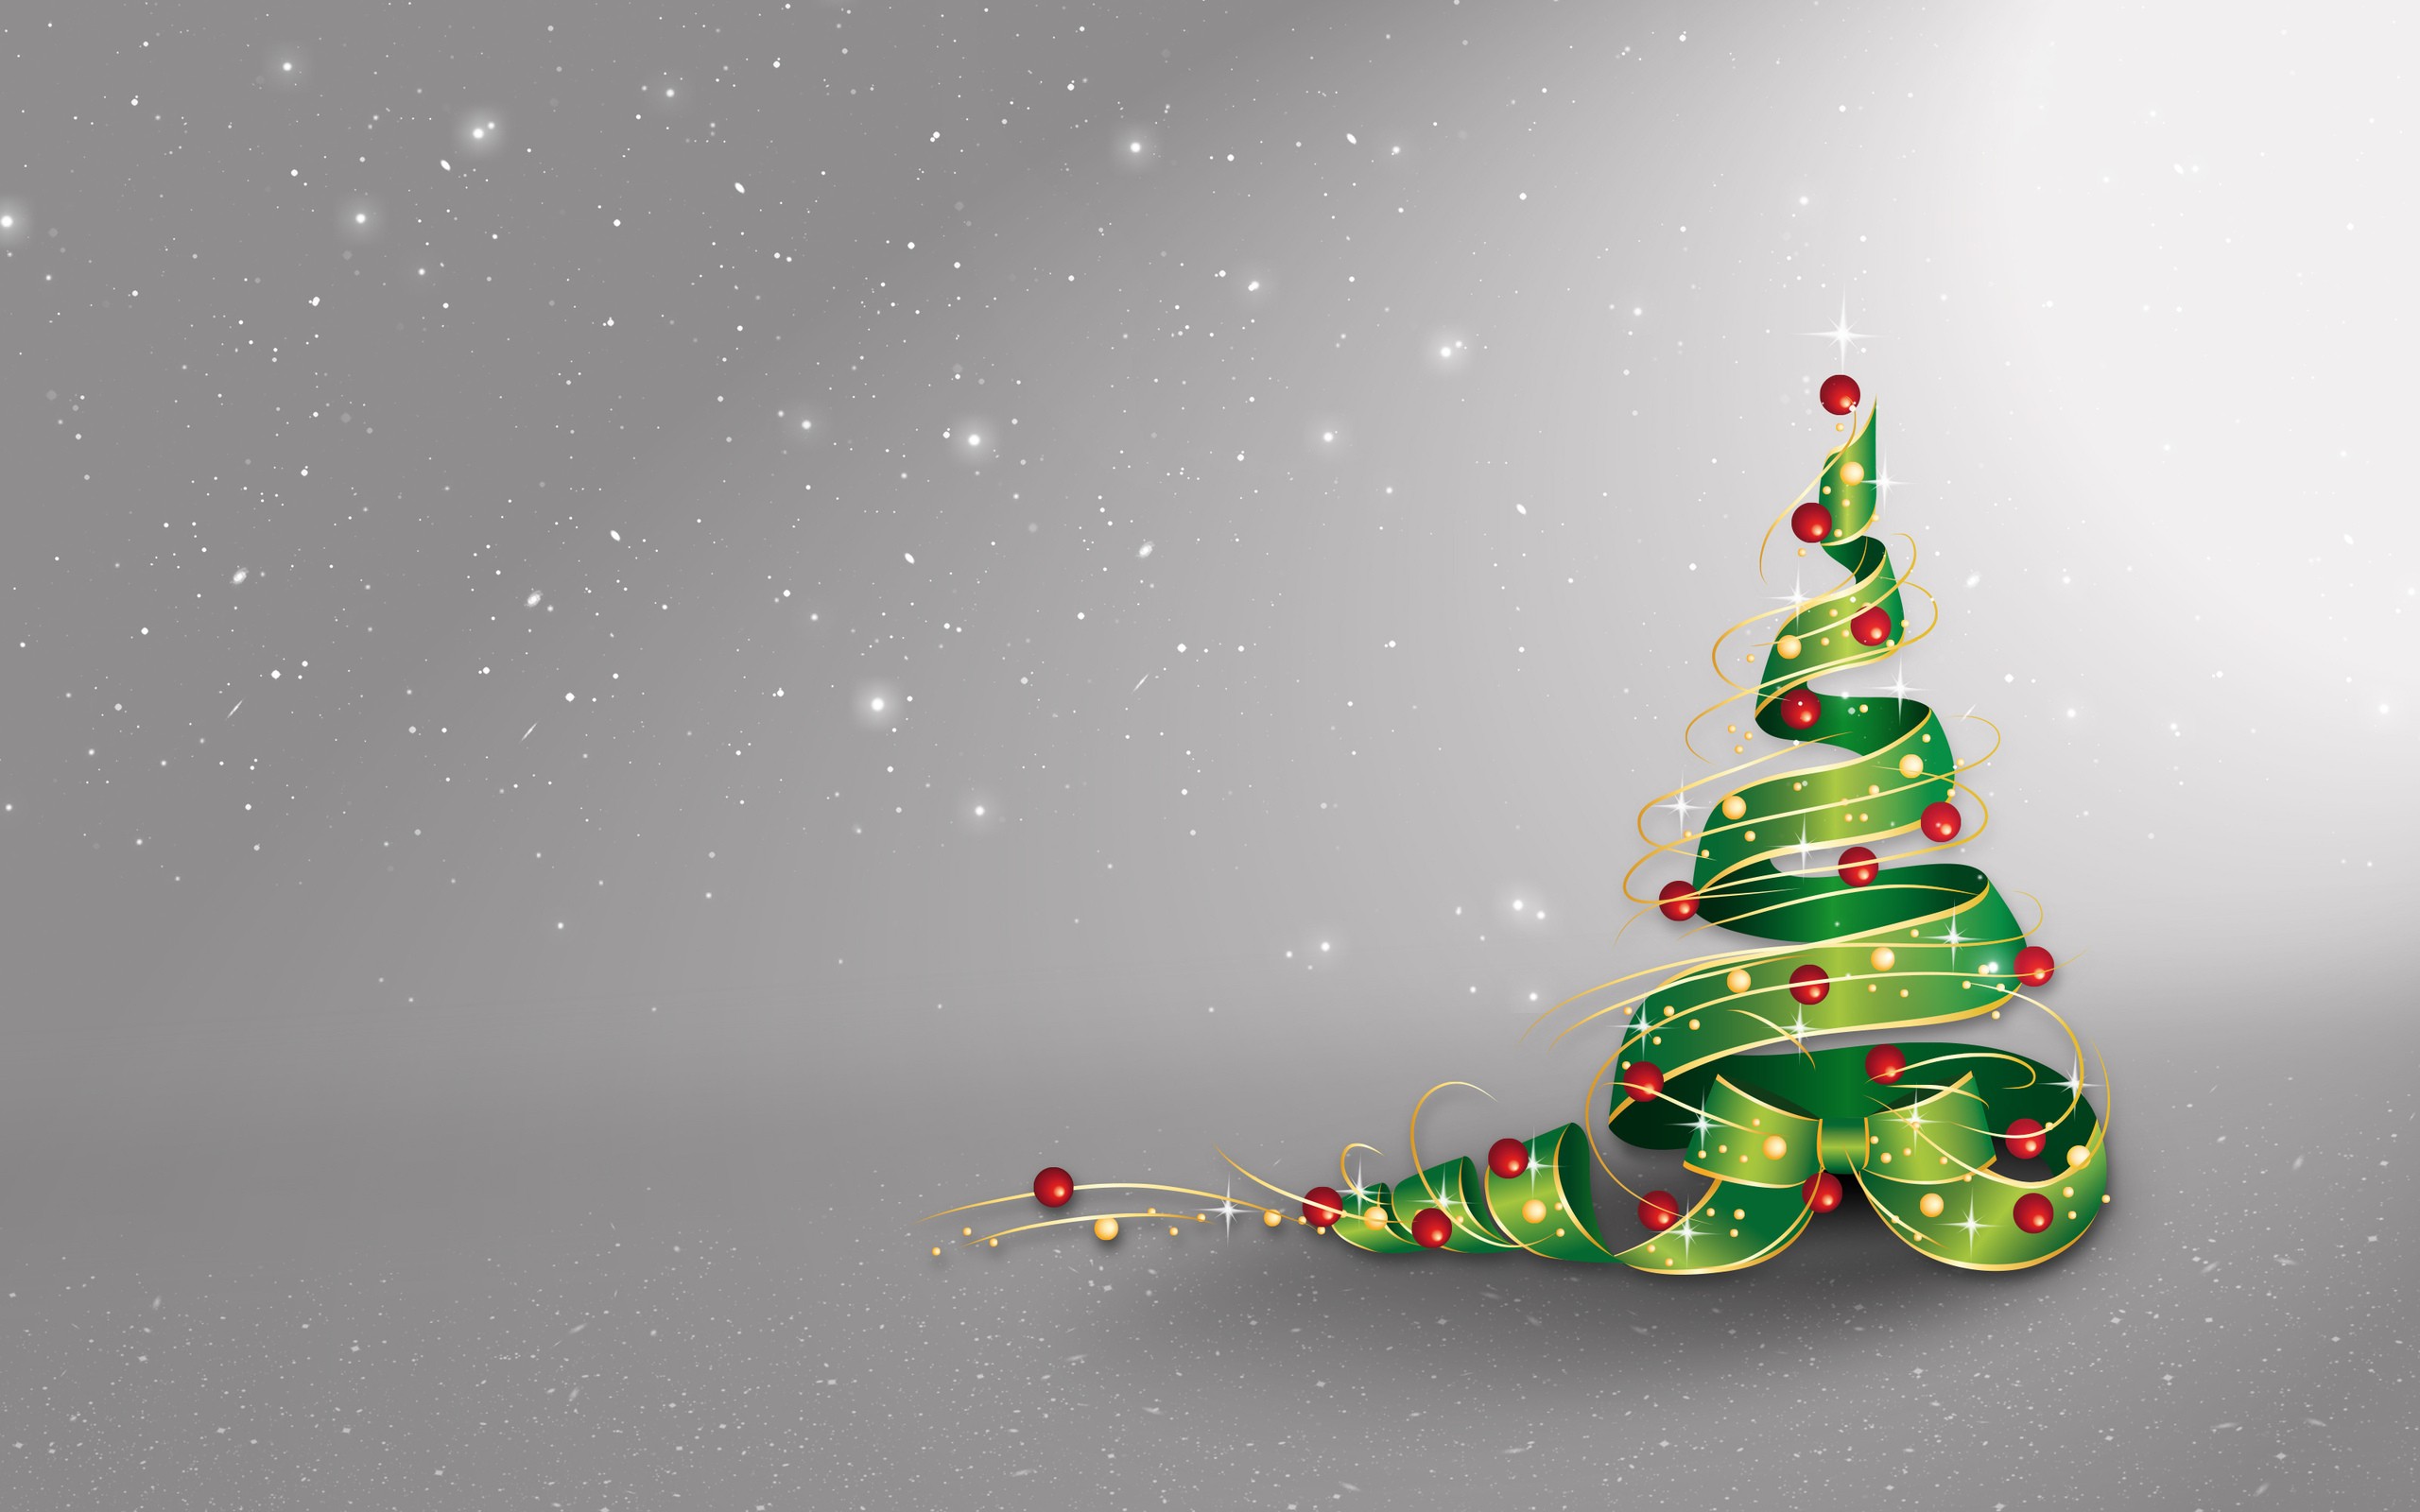 General 2560x1600 New Year snow Christmas ornaments  Christmas holiday gray background gradient simple background